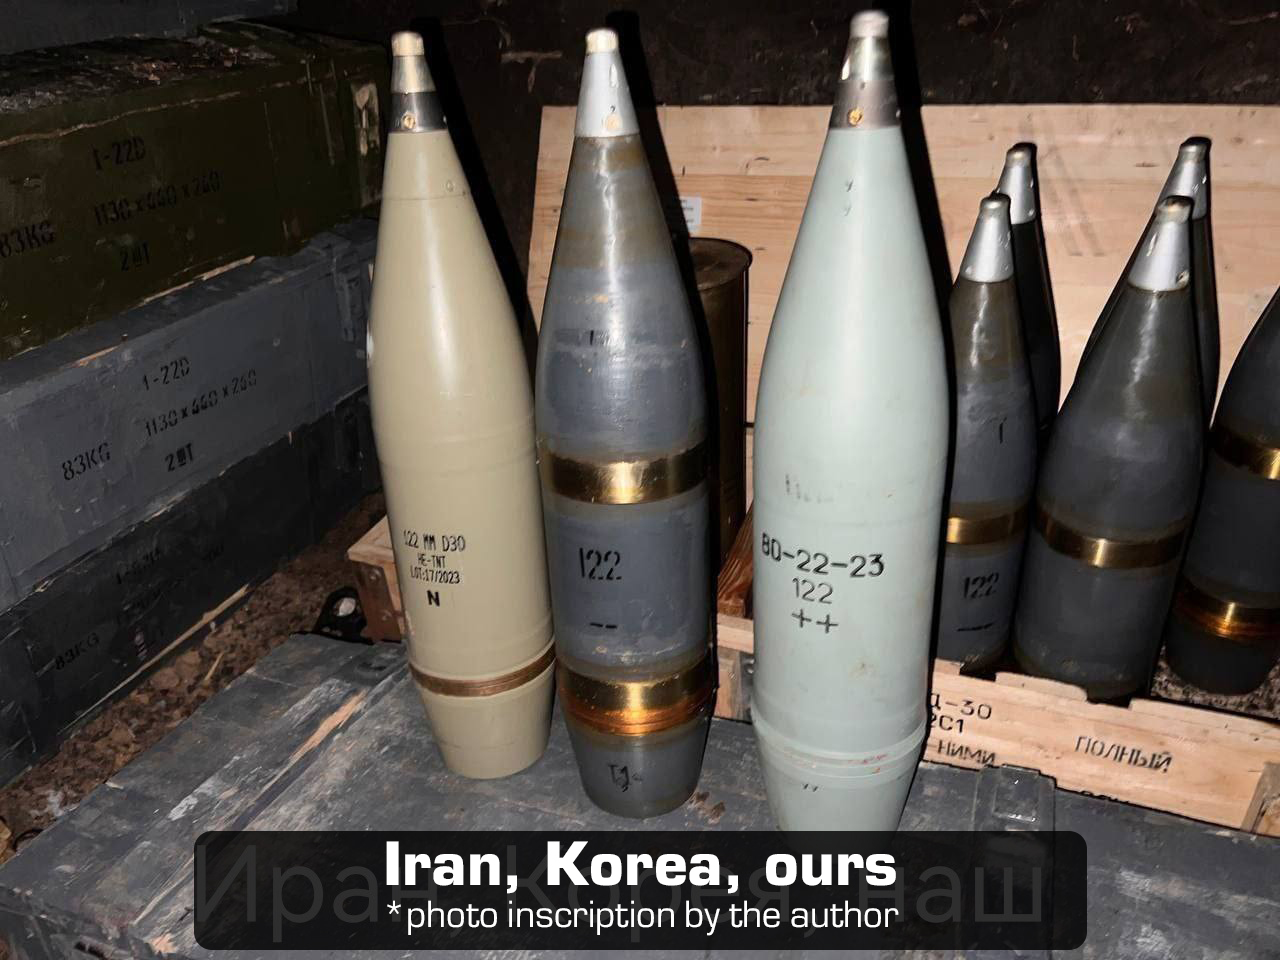 Comparison of artillery shells by an unknown russian author. Left to right: Iranian, North Korean, and russian rounds